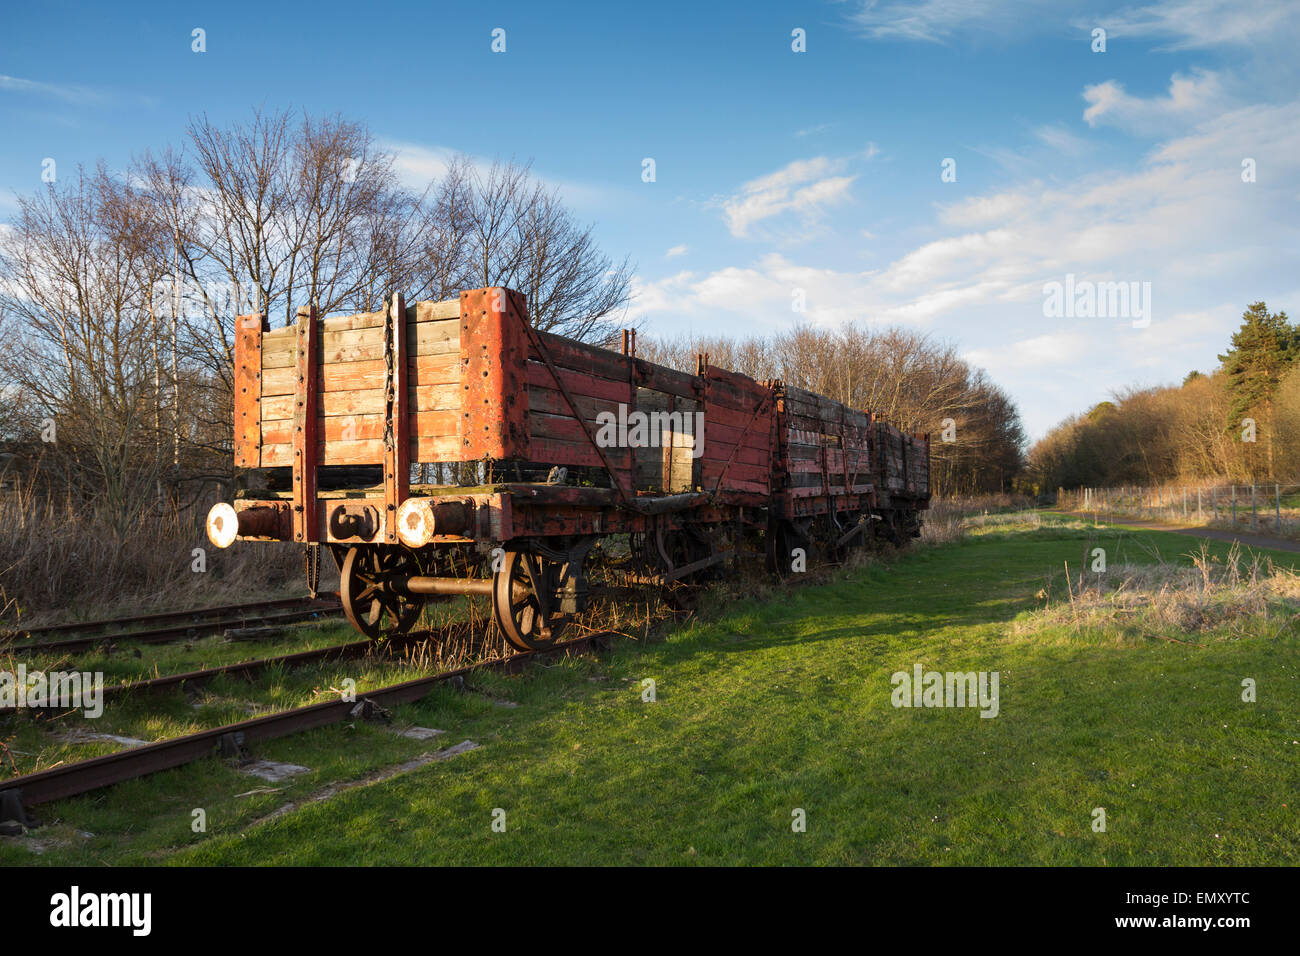 Dilapidated rolling stock in a railway siding Stock Photo